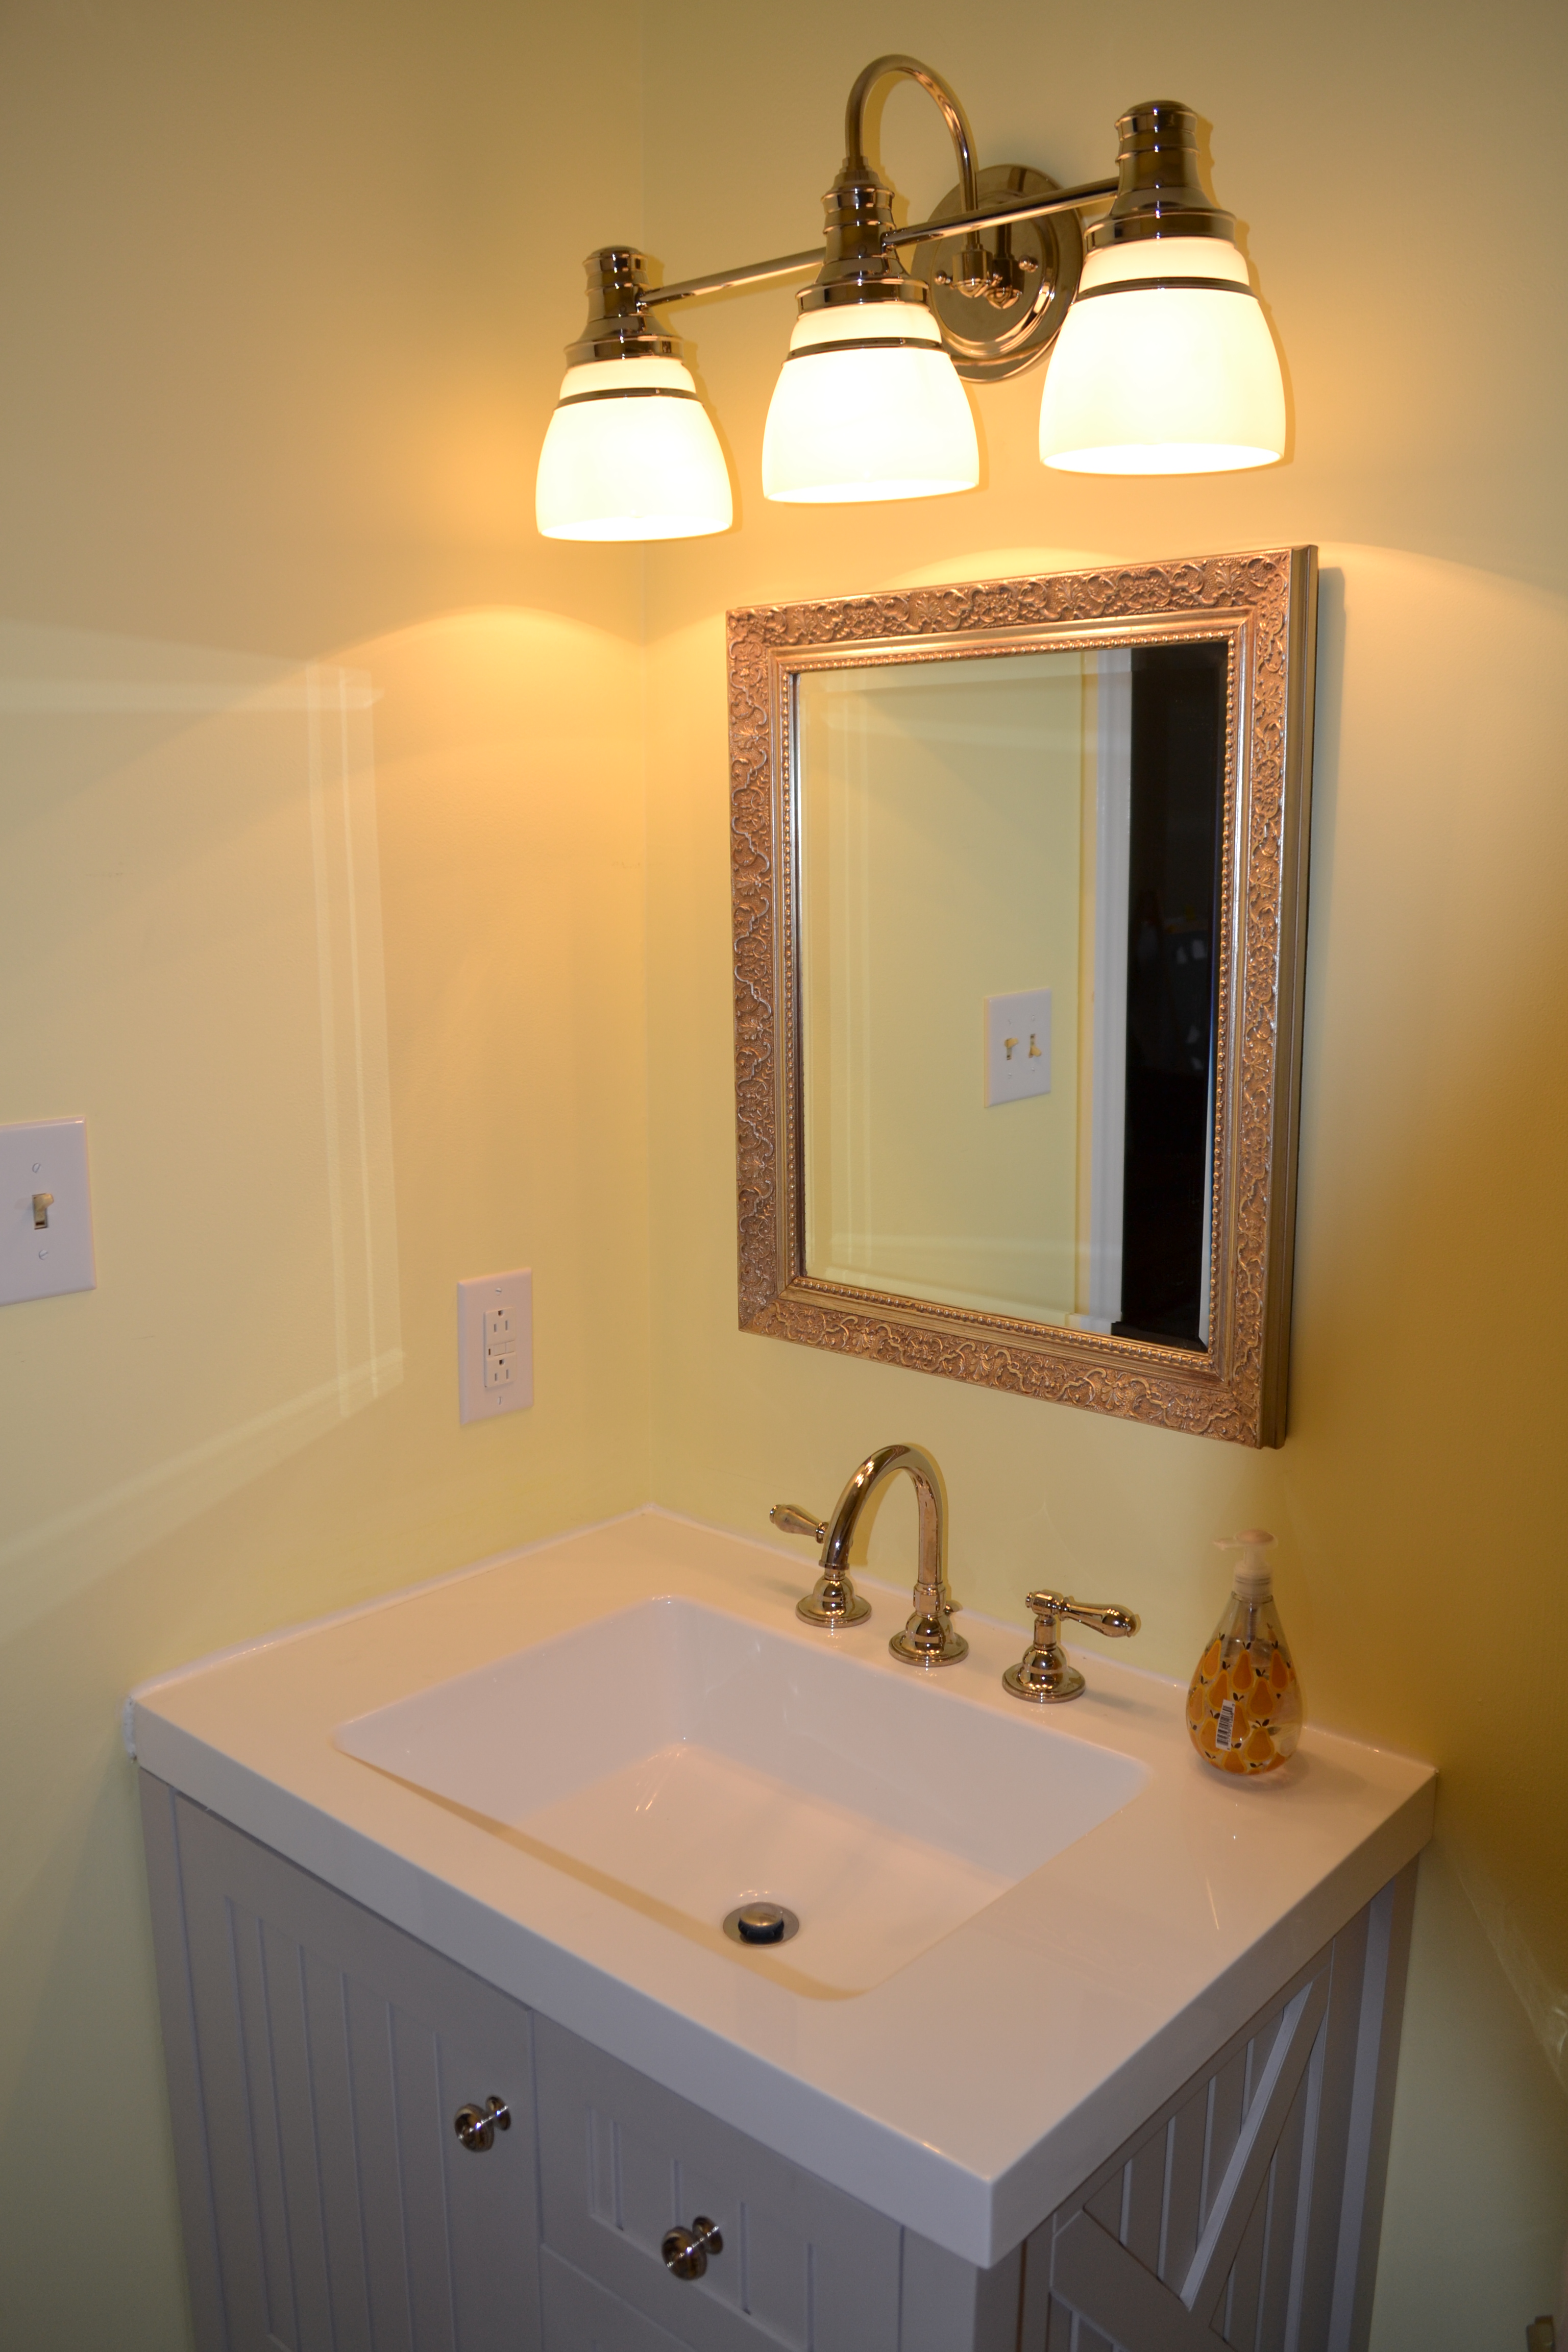 Installing New Vanity Lights To Enhance, How To Install A New Vanity Light Fixture